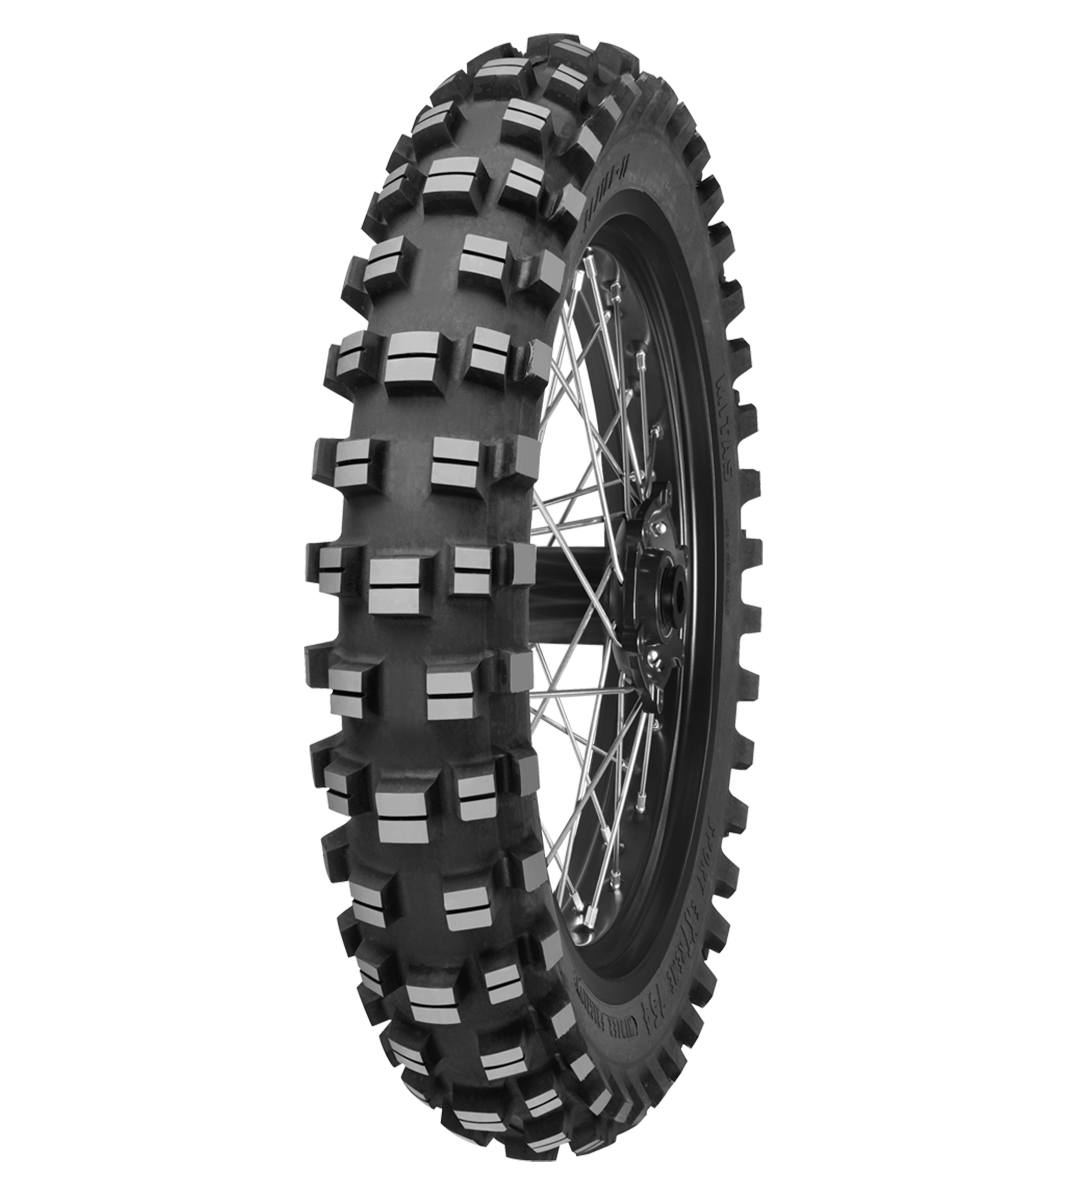 Mitas XT-754 110/90-19 All-Terrain Off-Road 62M No Stripe Tube Rear Tire, 228063, 110/90-19, All-Terrain, Off-Road, Rear, XT-754, Tires - Imported and distributed in North & South America by Lindeco Genuine Powersports - Premier Powersports Equipment and Accessories for Motorcycle Enthusiasts, Professional Riders and Dealers.